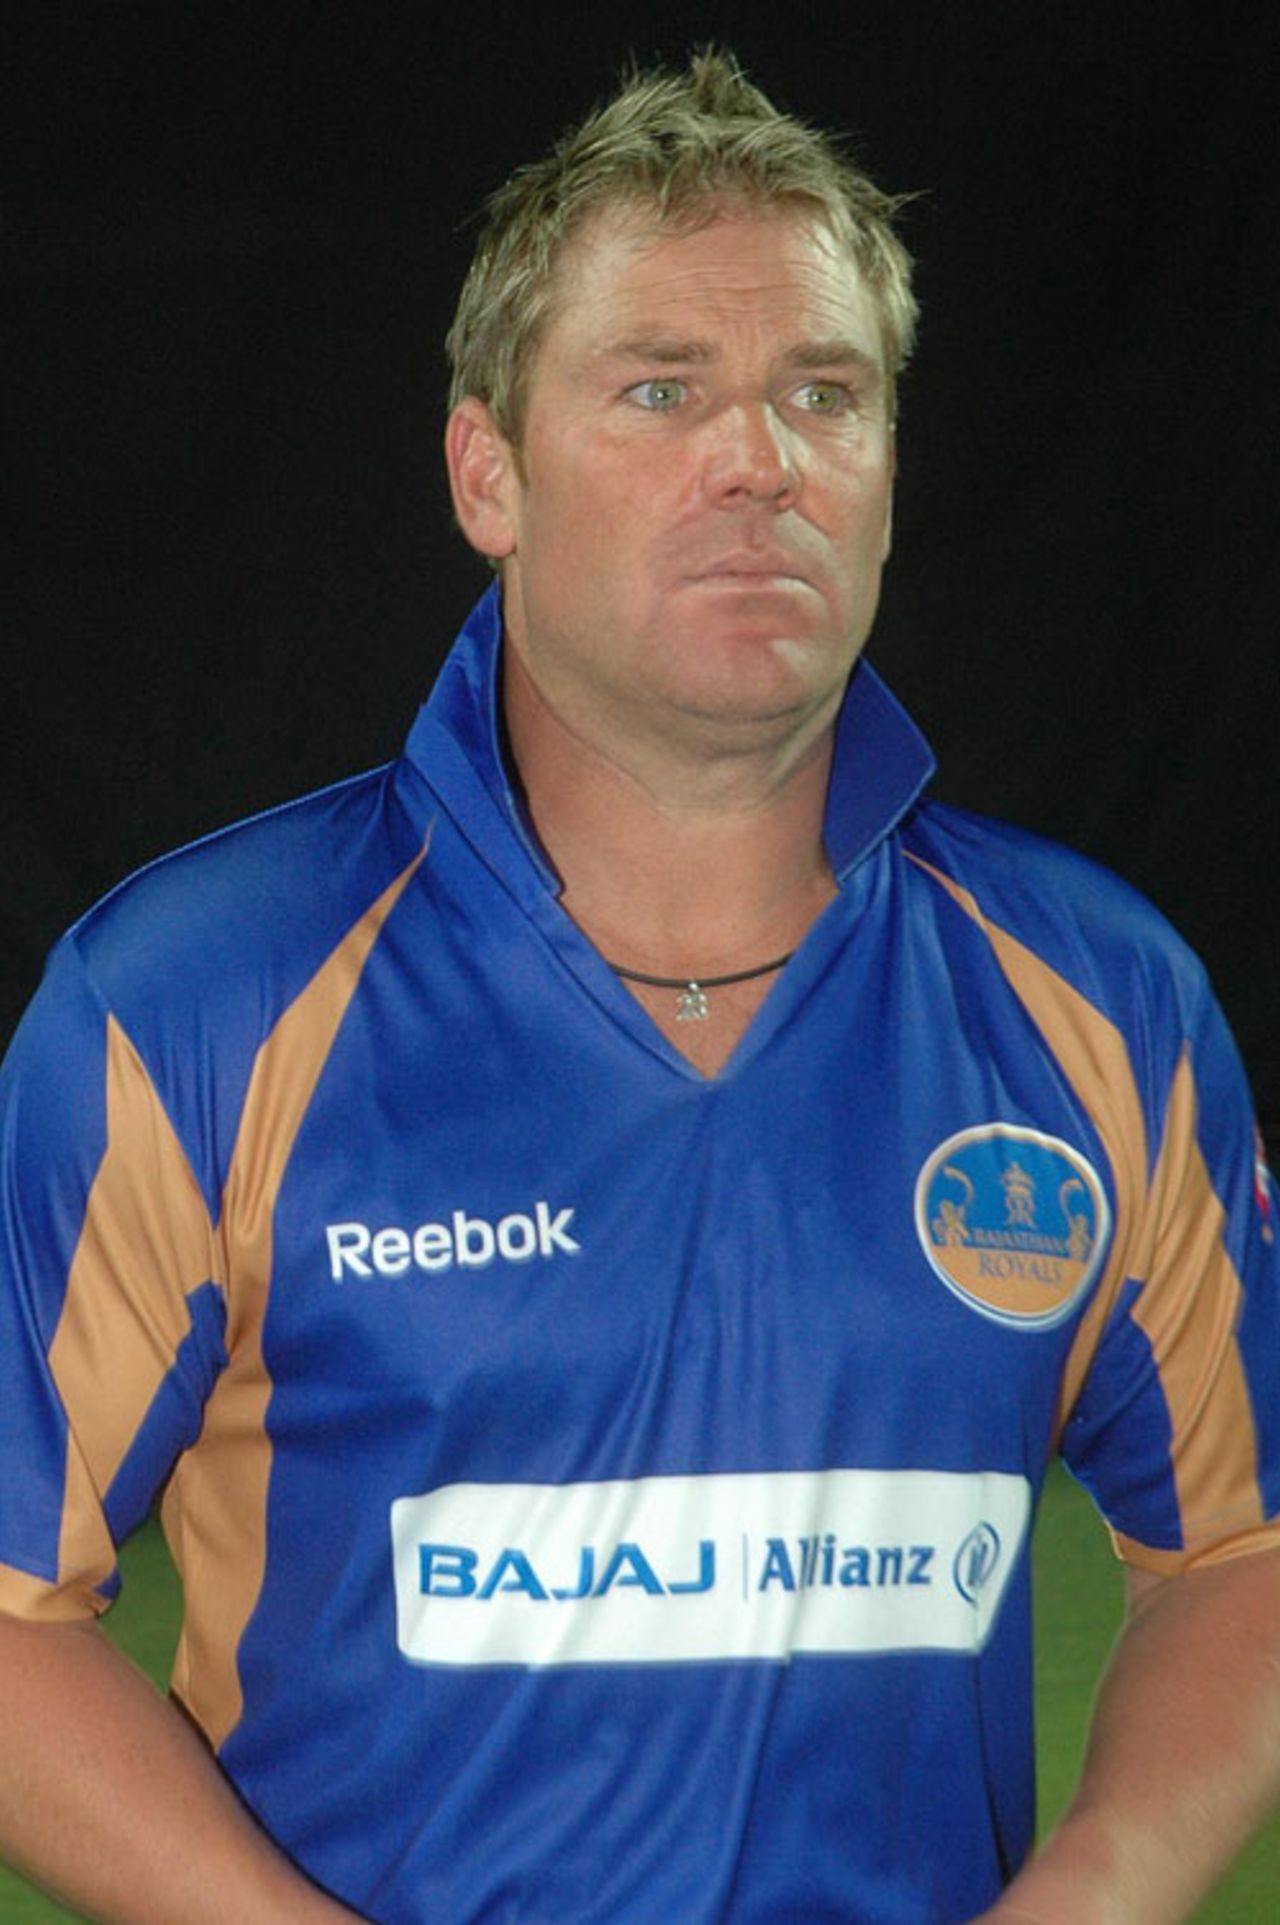 Shane Warne, the Rajasthan Royals' captain, poses for a photograph during a promotional event, April 16, 2008 